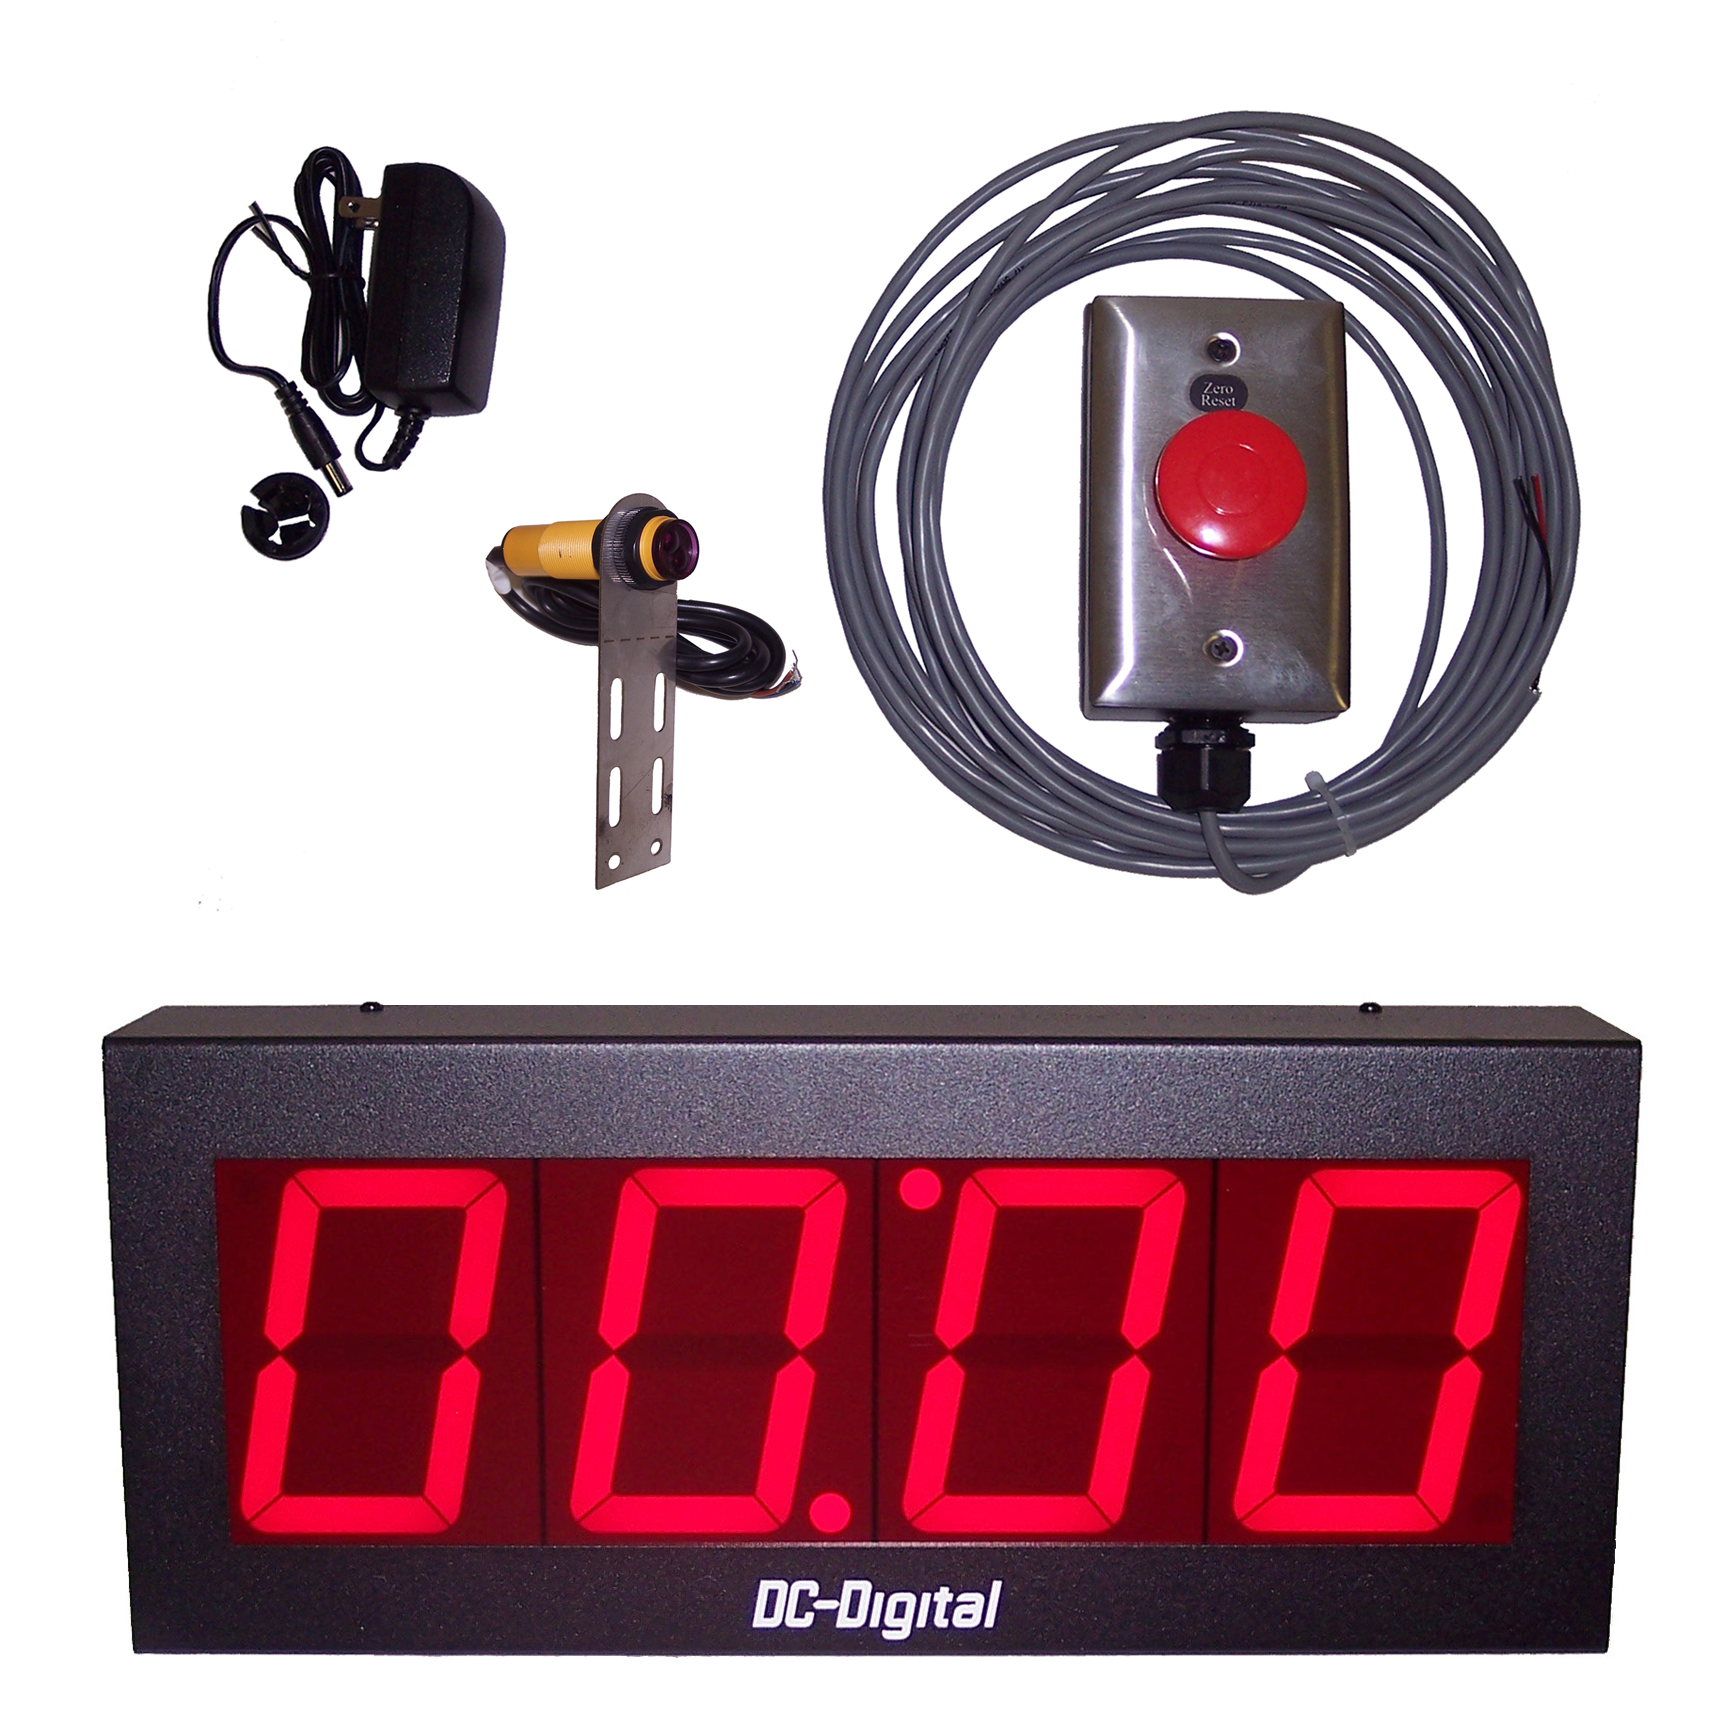 (DC-40T-UP-PKG-SHRT) 4.0 Inch LED Digital, Process Count Up Timer Package, Includes: Short Range Diffused Photo-Reflective Sensor and Mount (adj. to 10 Inches), 40mm Reset Palm Switch (J-Box, Stainless Cover, 25ft. Cabling) and Power Supply "Ships FREE !"